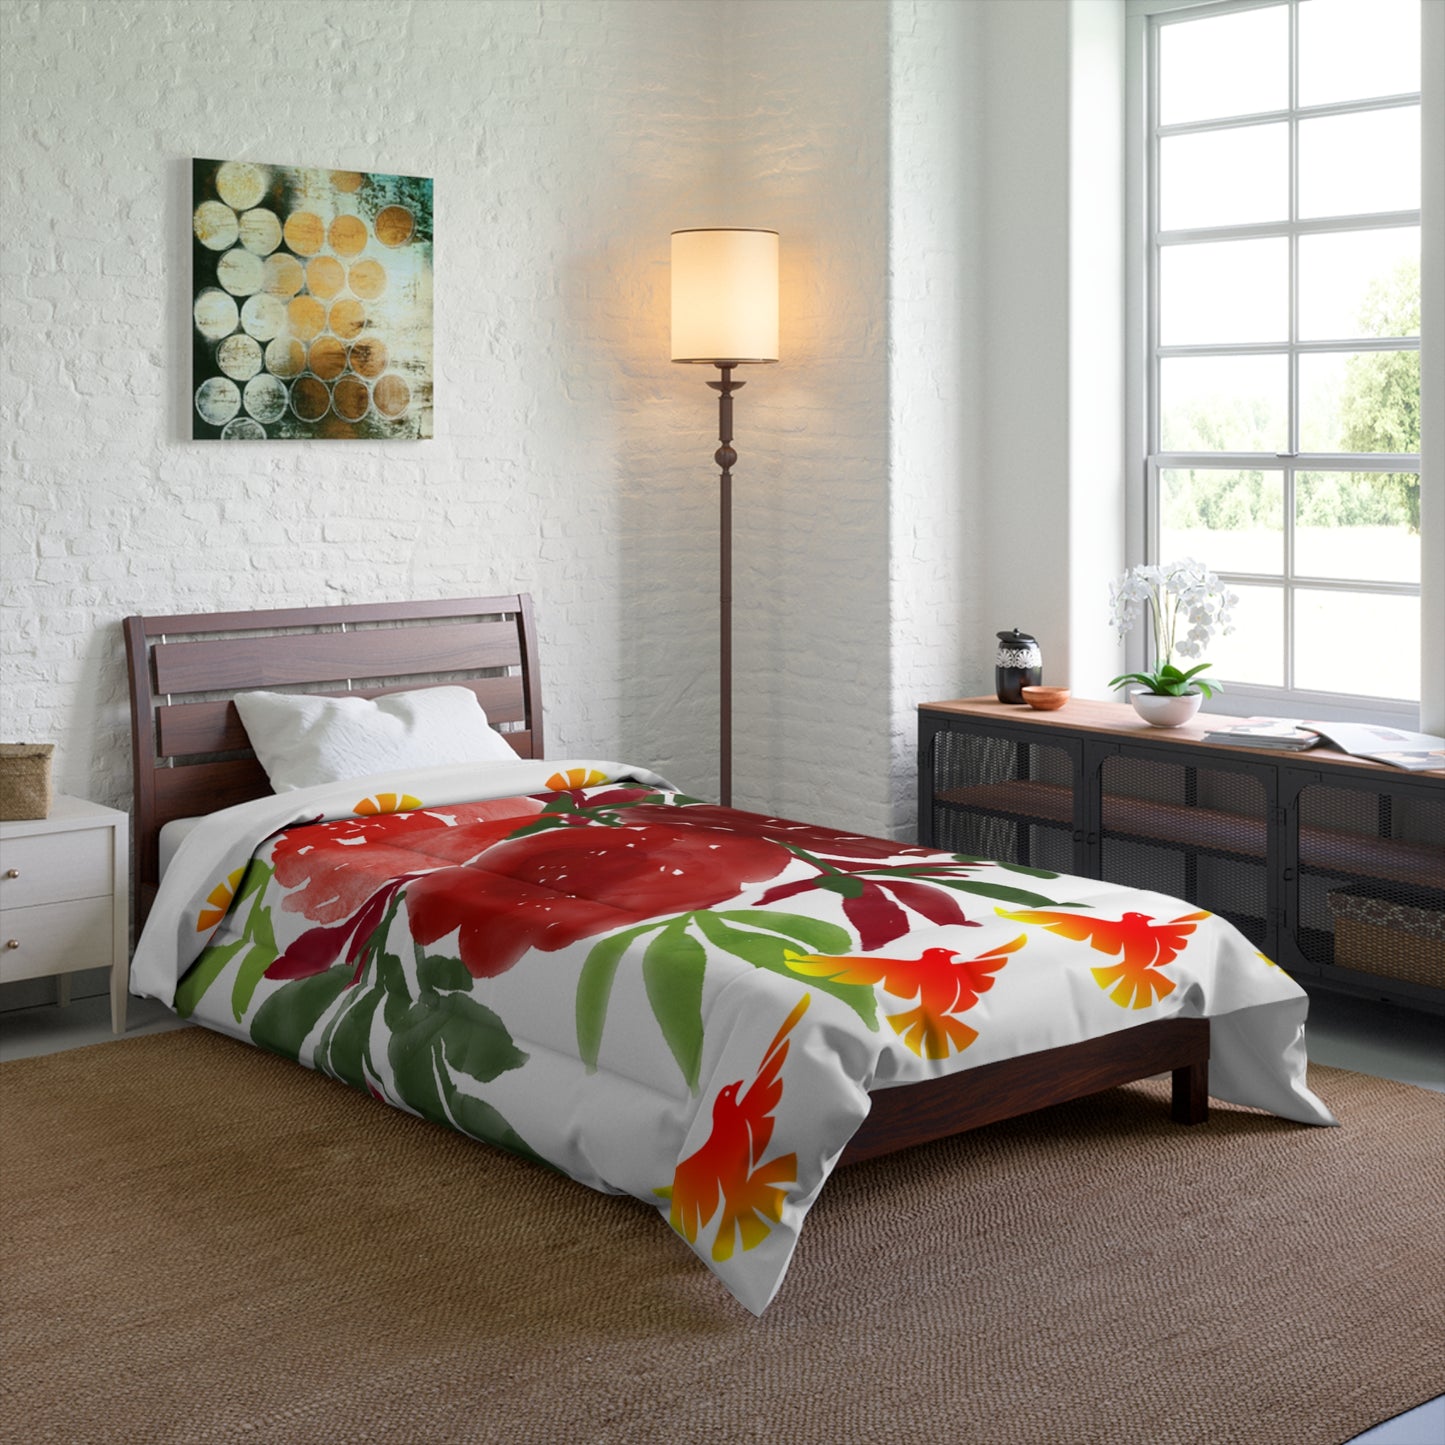 The Ultimate doona blanket Comforter with a Centred  flower and   edged birds